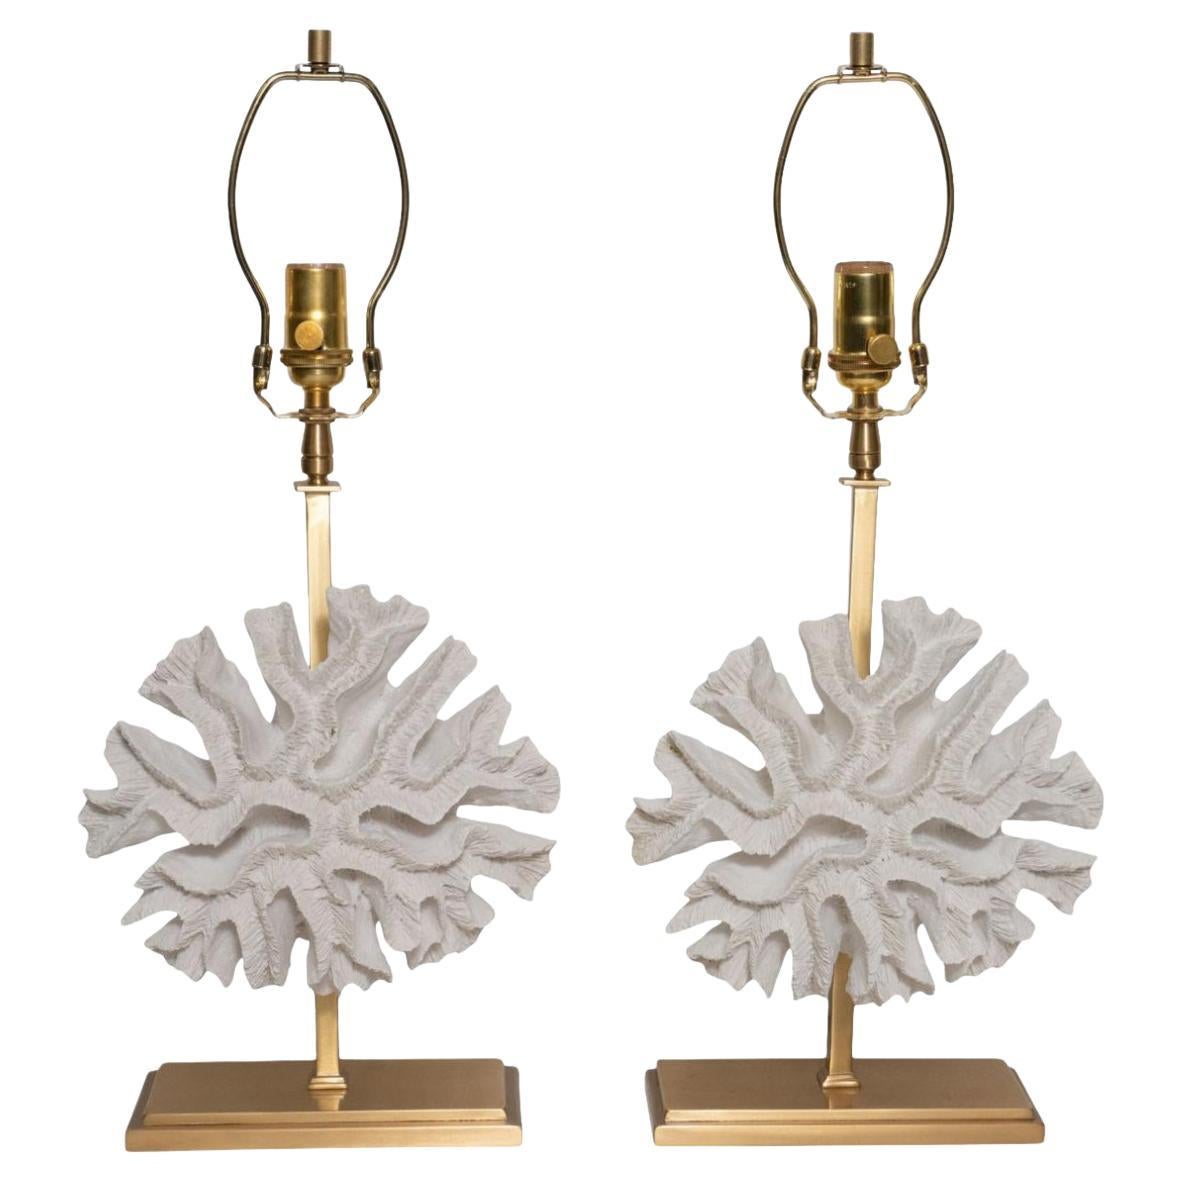 Pair of Faux Coral Table Lamps by Marcelo Bessa for Spark Interior